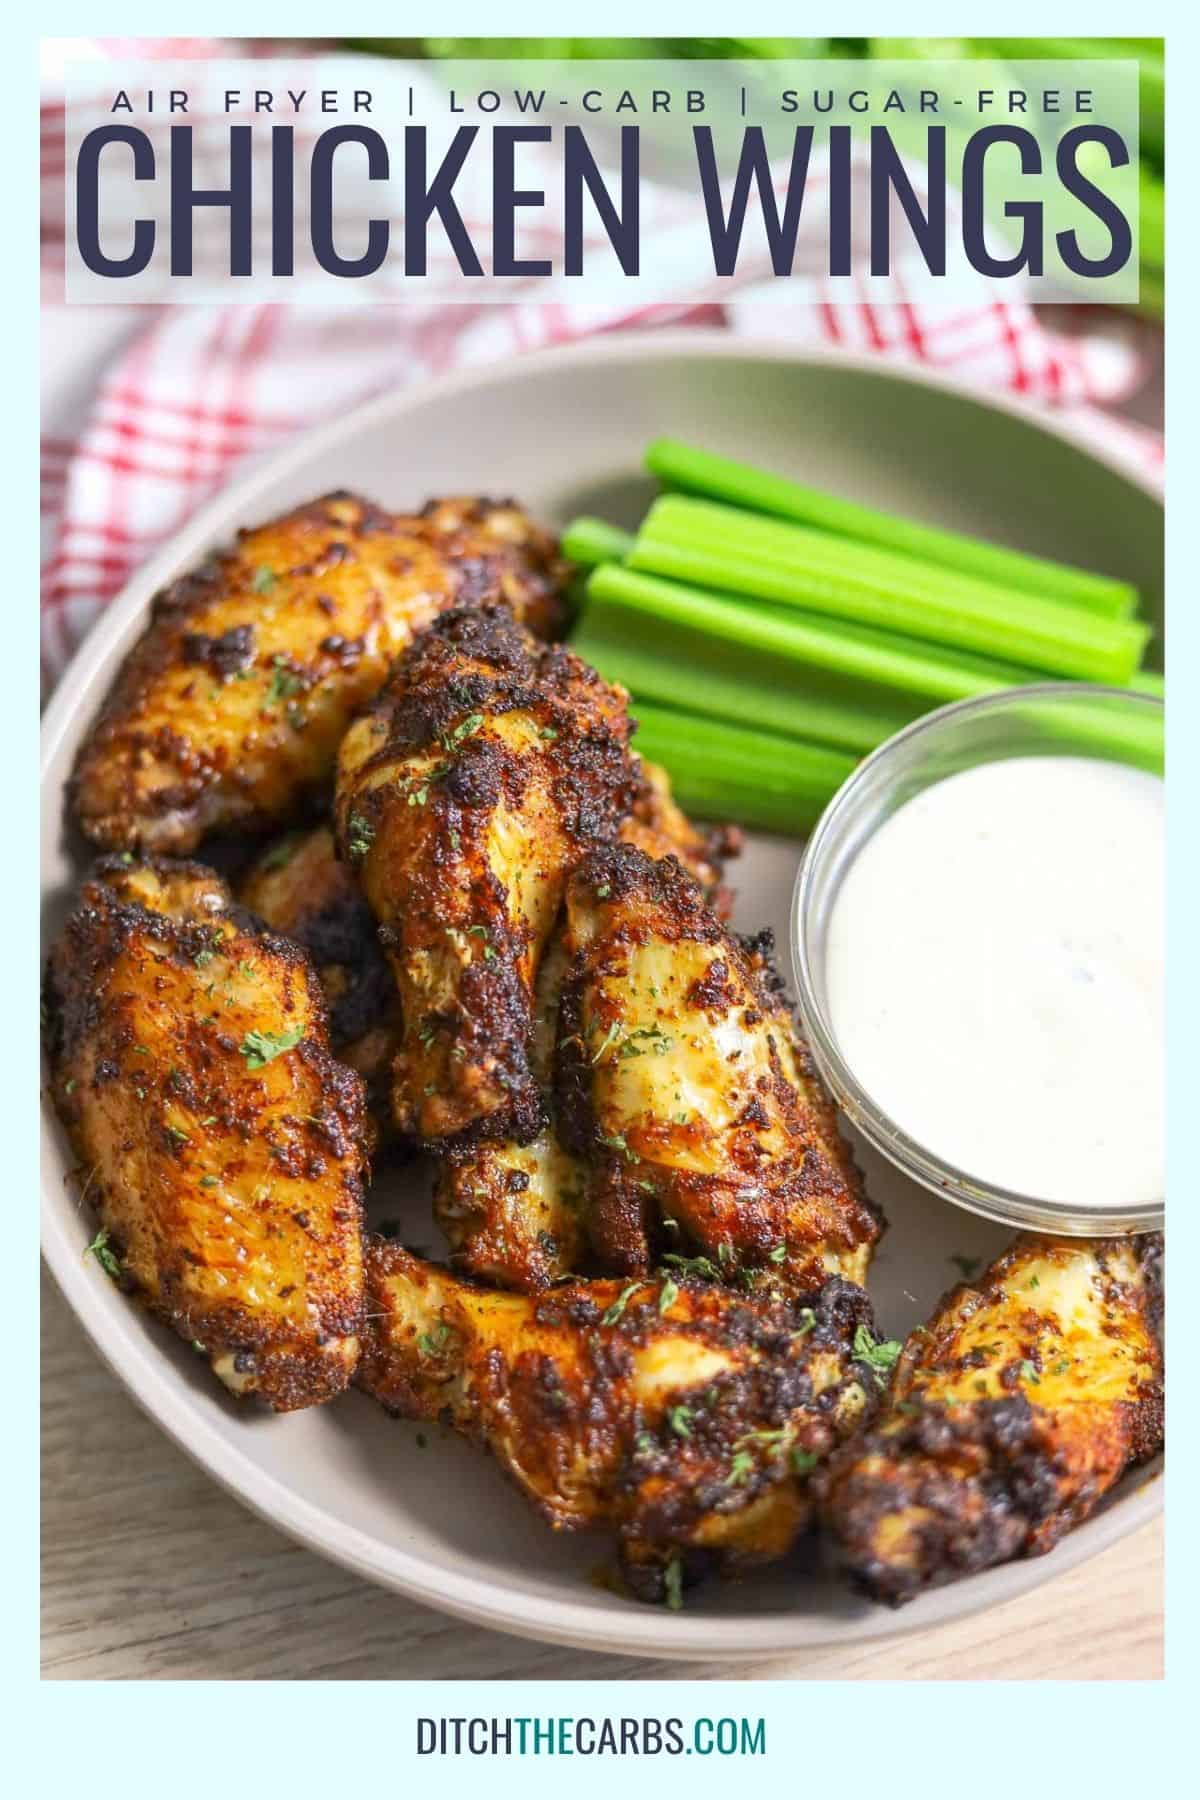 How To Cook Air Fryer Chicken Wings (Keto Chicken) – Ditch The Carbs